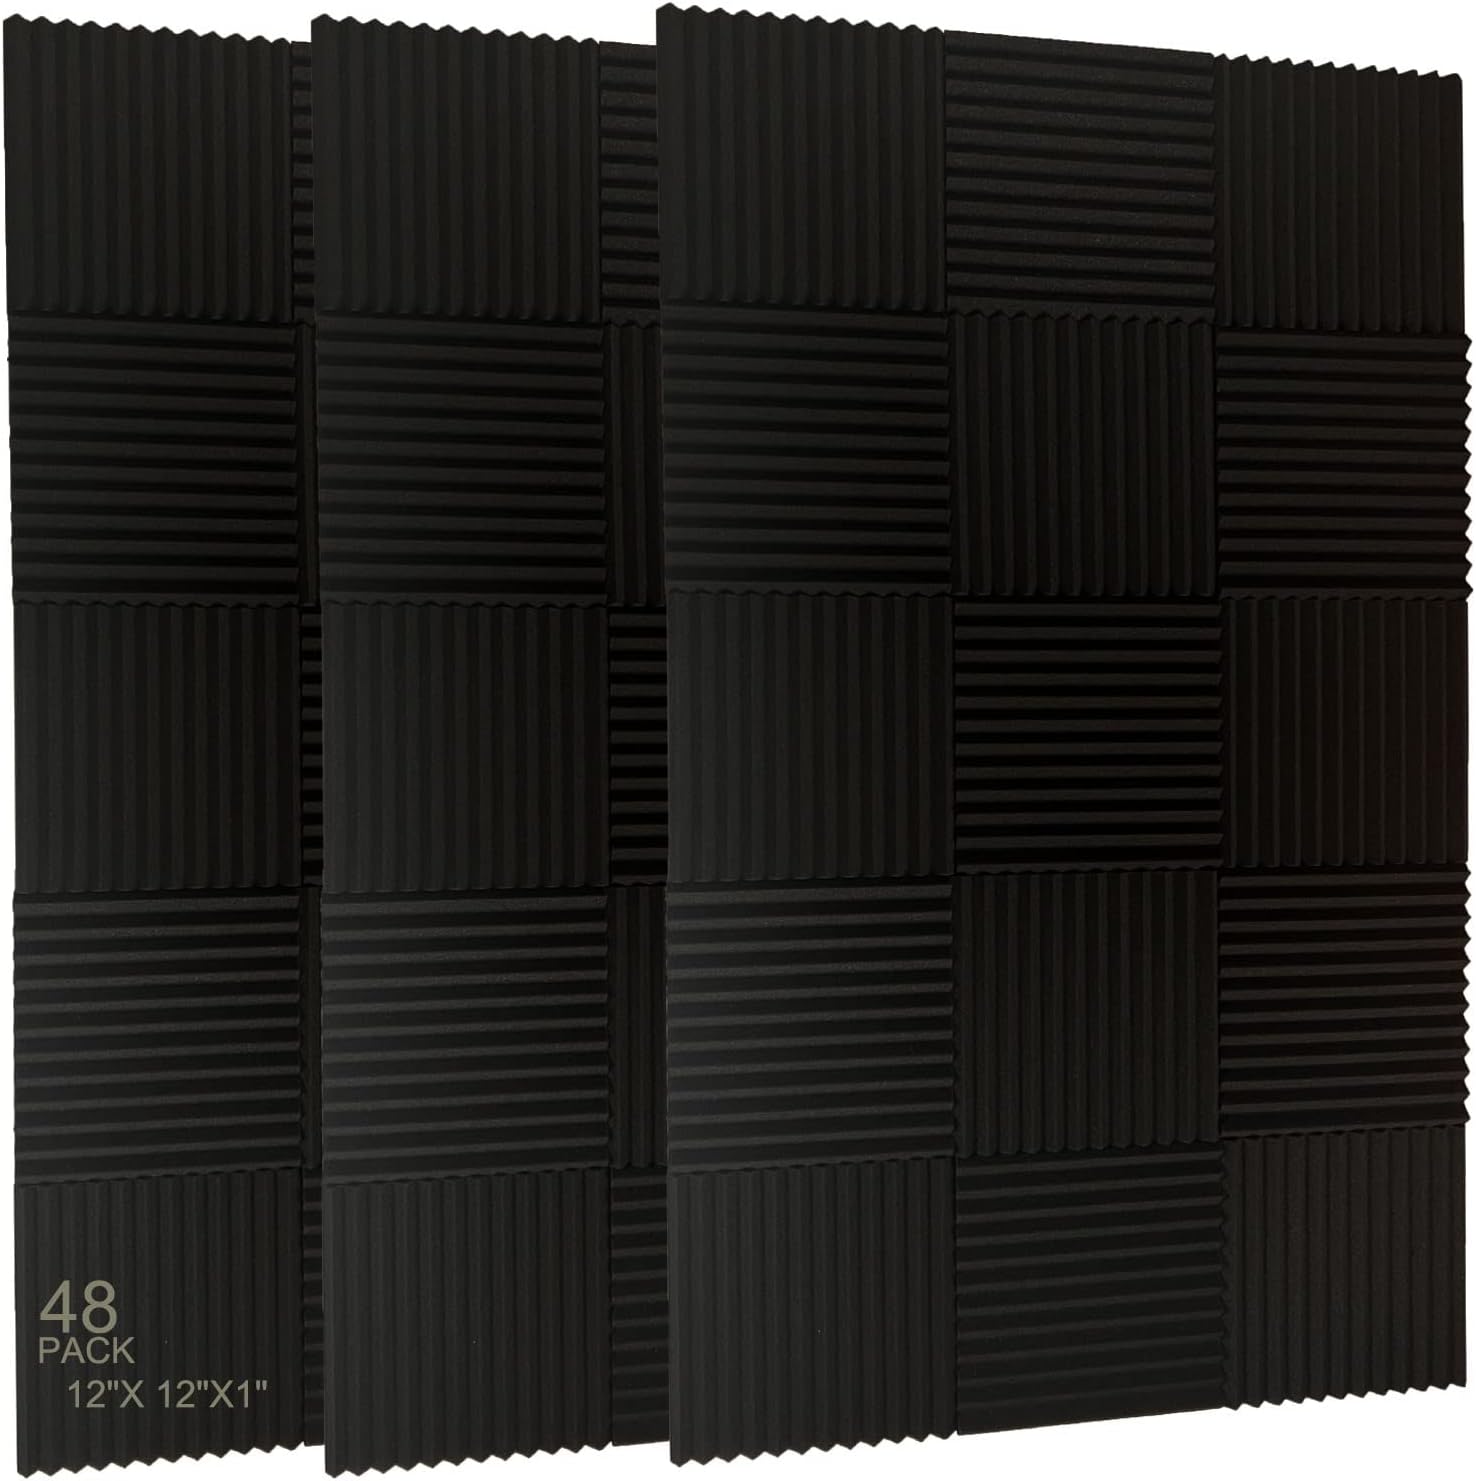 48 Pack Acoustic Foam Panel Wedge Studio Soundproofing Wall Tiles 12 X 12 X 1